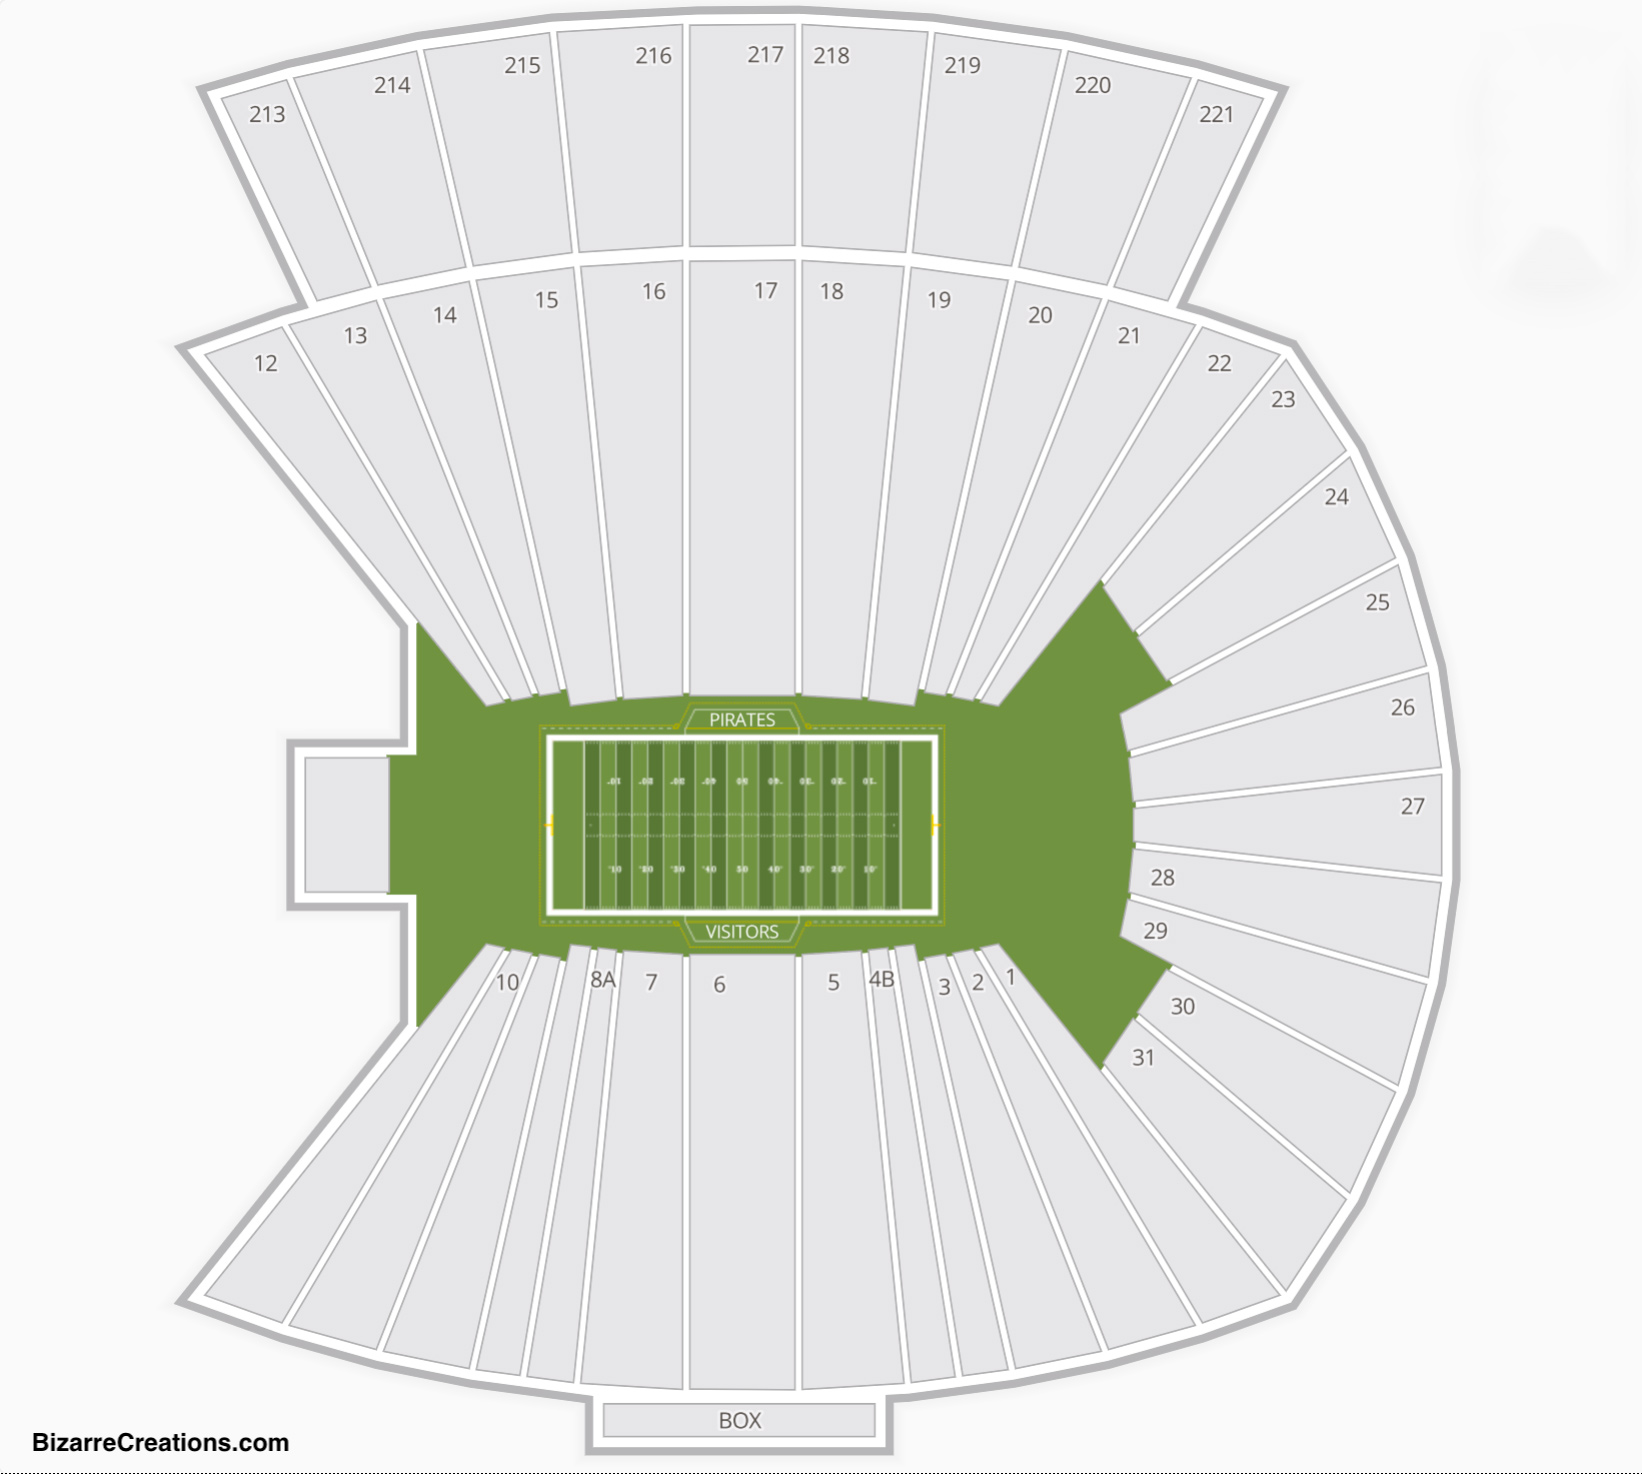 DowdyFicklen Stadium Seating Chart Seating Charts & Tickets